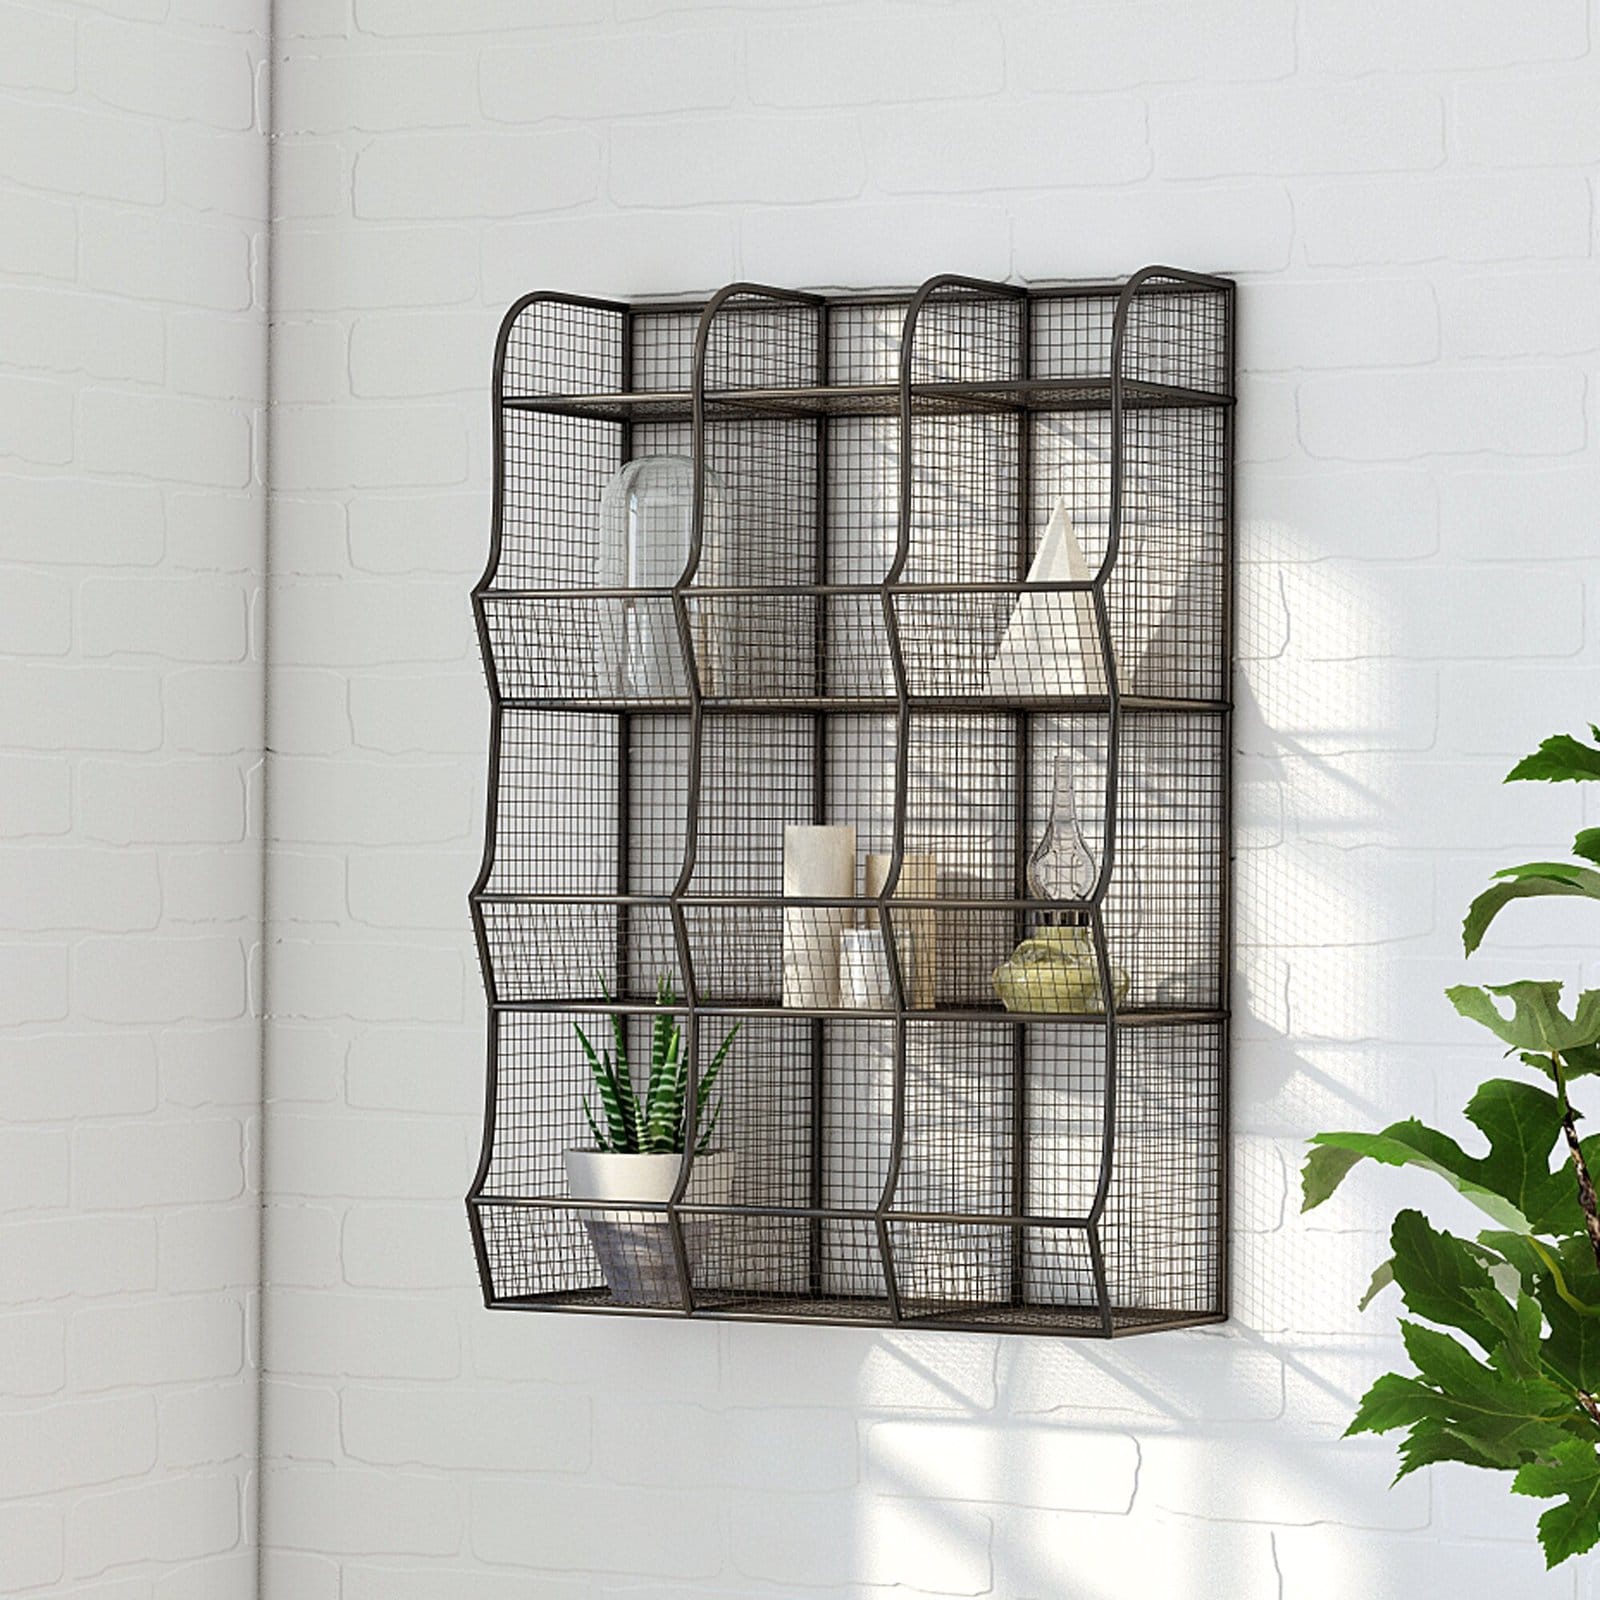 Show Off Your Plants on a Wire Mesh Shelf